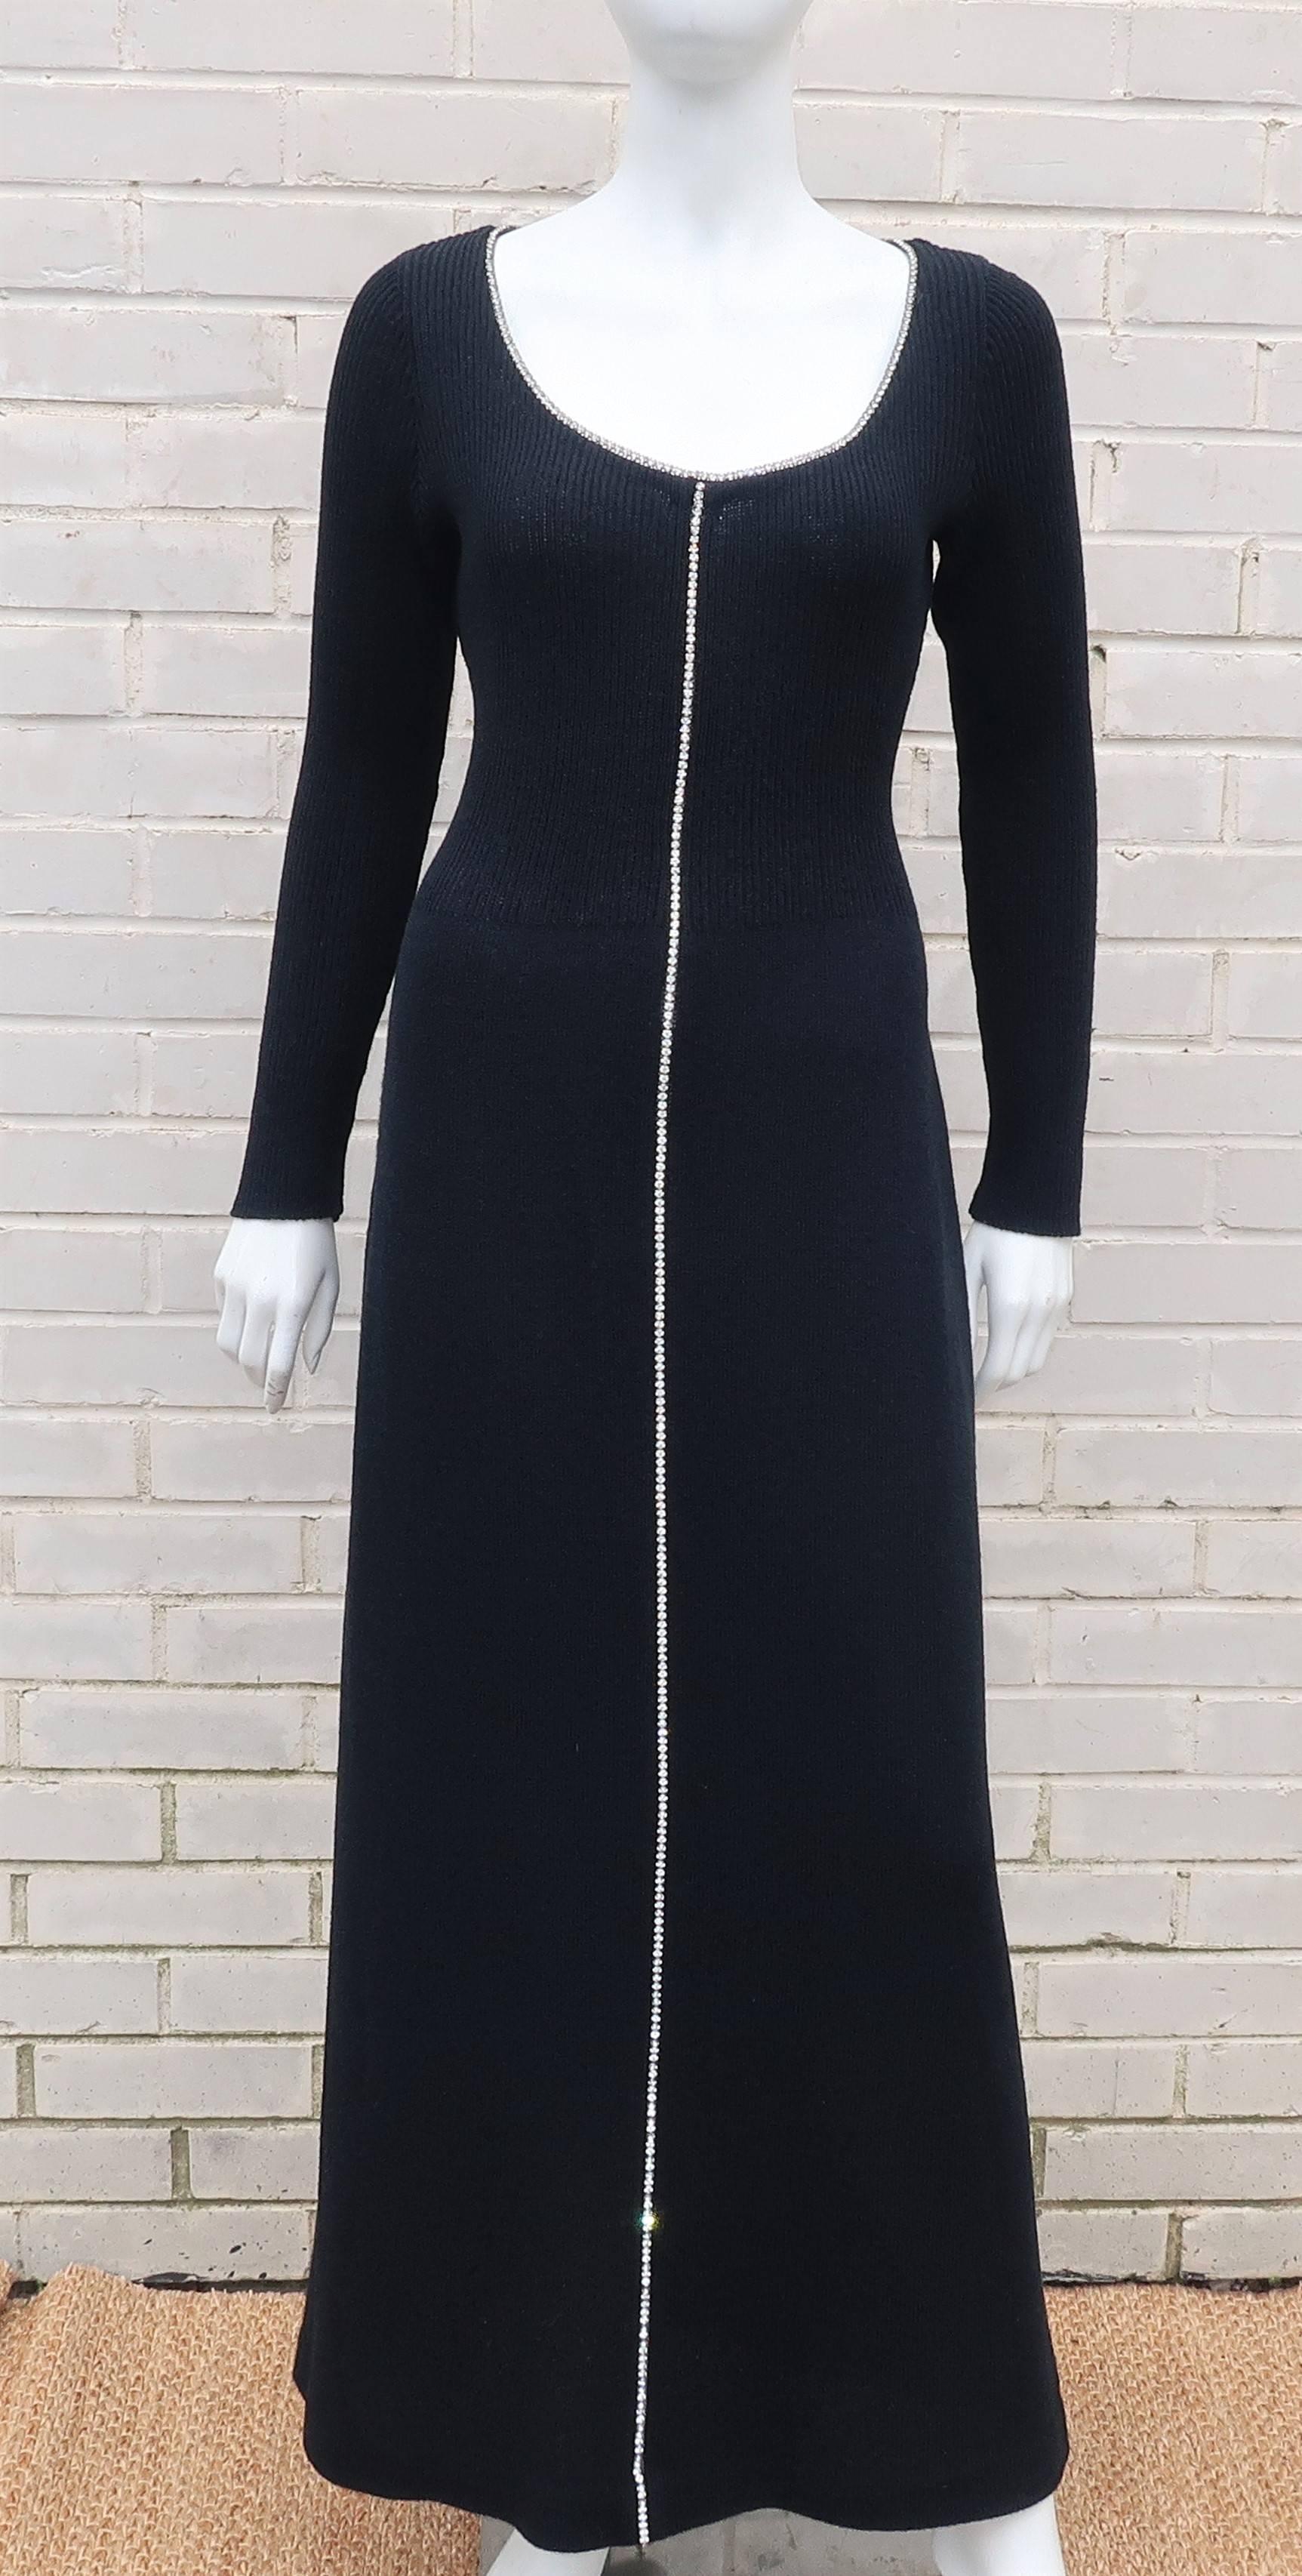 Show off your best assets with this easy-to-wear 1970’s black body conscious knit evening dress embellished with sparkly rhinestones.  The dress zips and hooks at the back in a fabric similar in weight and feel to the rayon knitwear favored by the